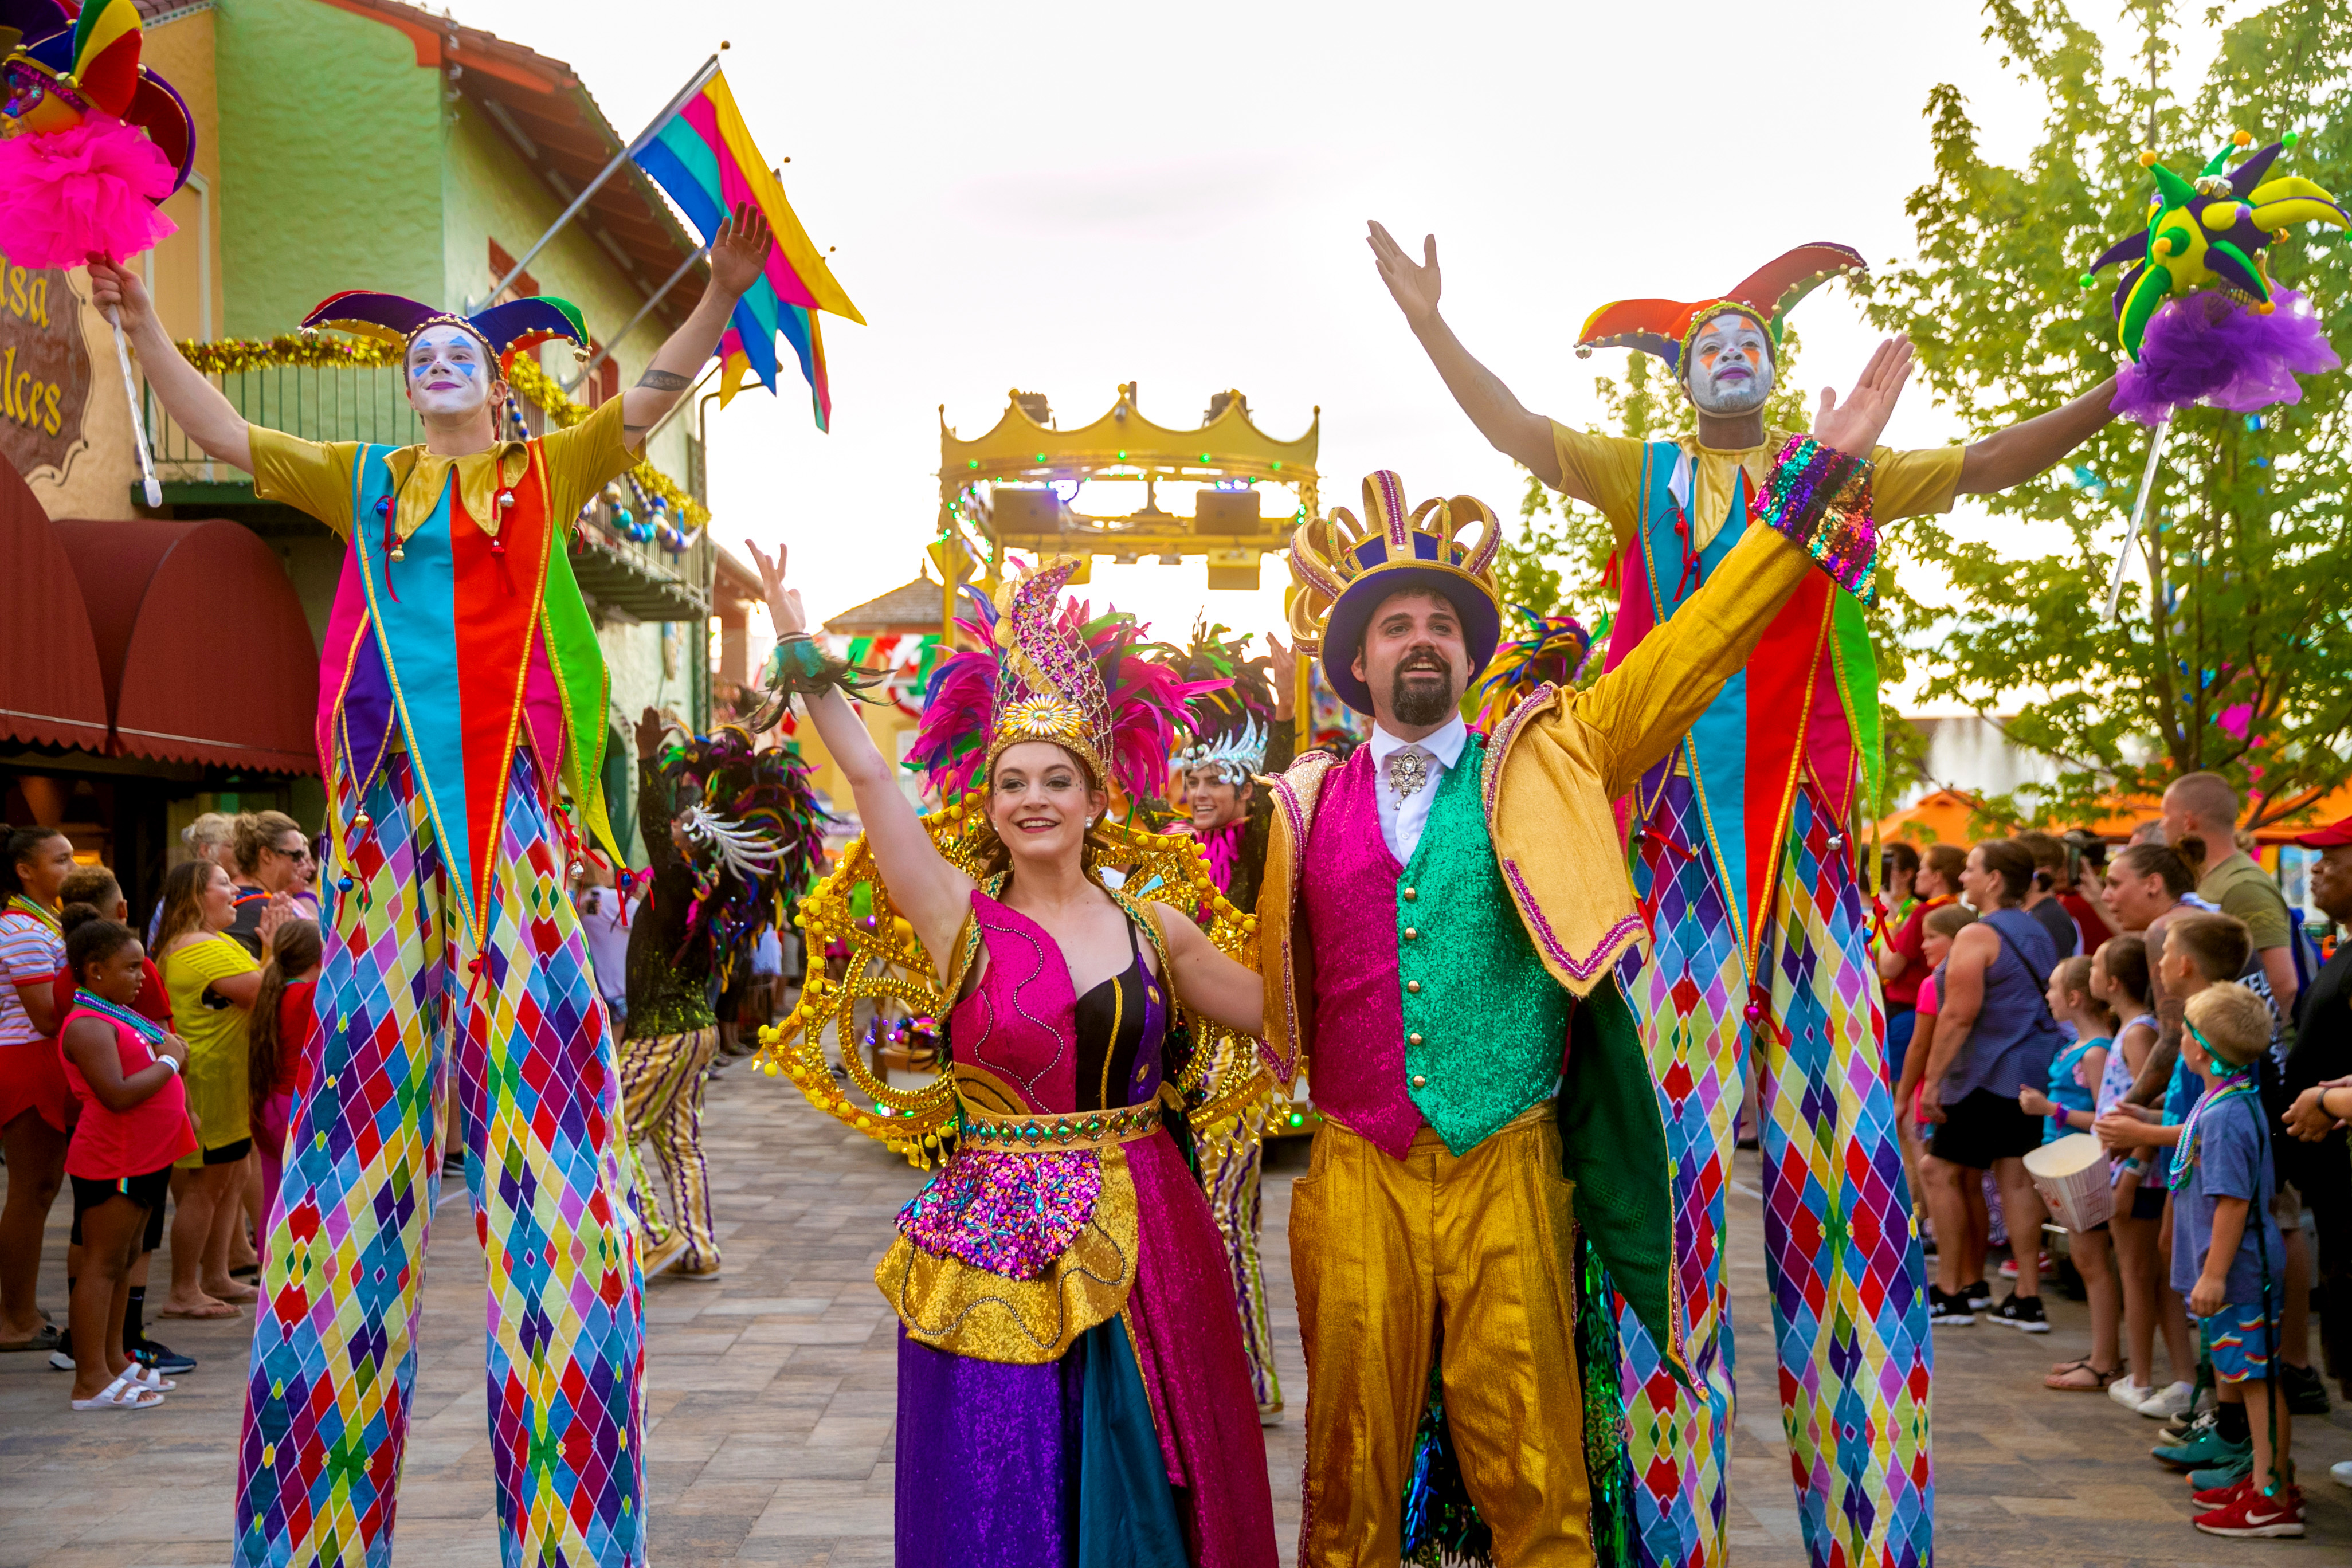 The new Carnivale at Orleans Place festival at California's Great America will feature a full-scale parade, dubbed the Spectacle of Color. This immersive parade will feature extravagantly decorated floats and performers who draw park guests into the action. Carnivale at Orleans Place occurs nightly, July 18-August 2.